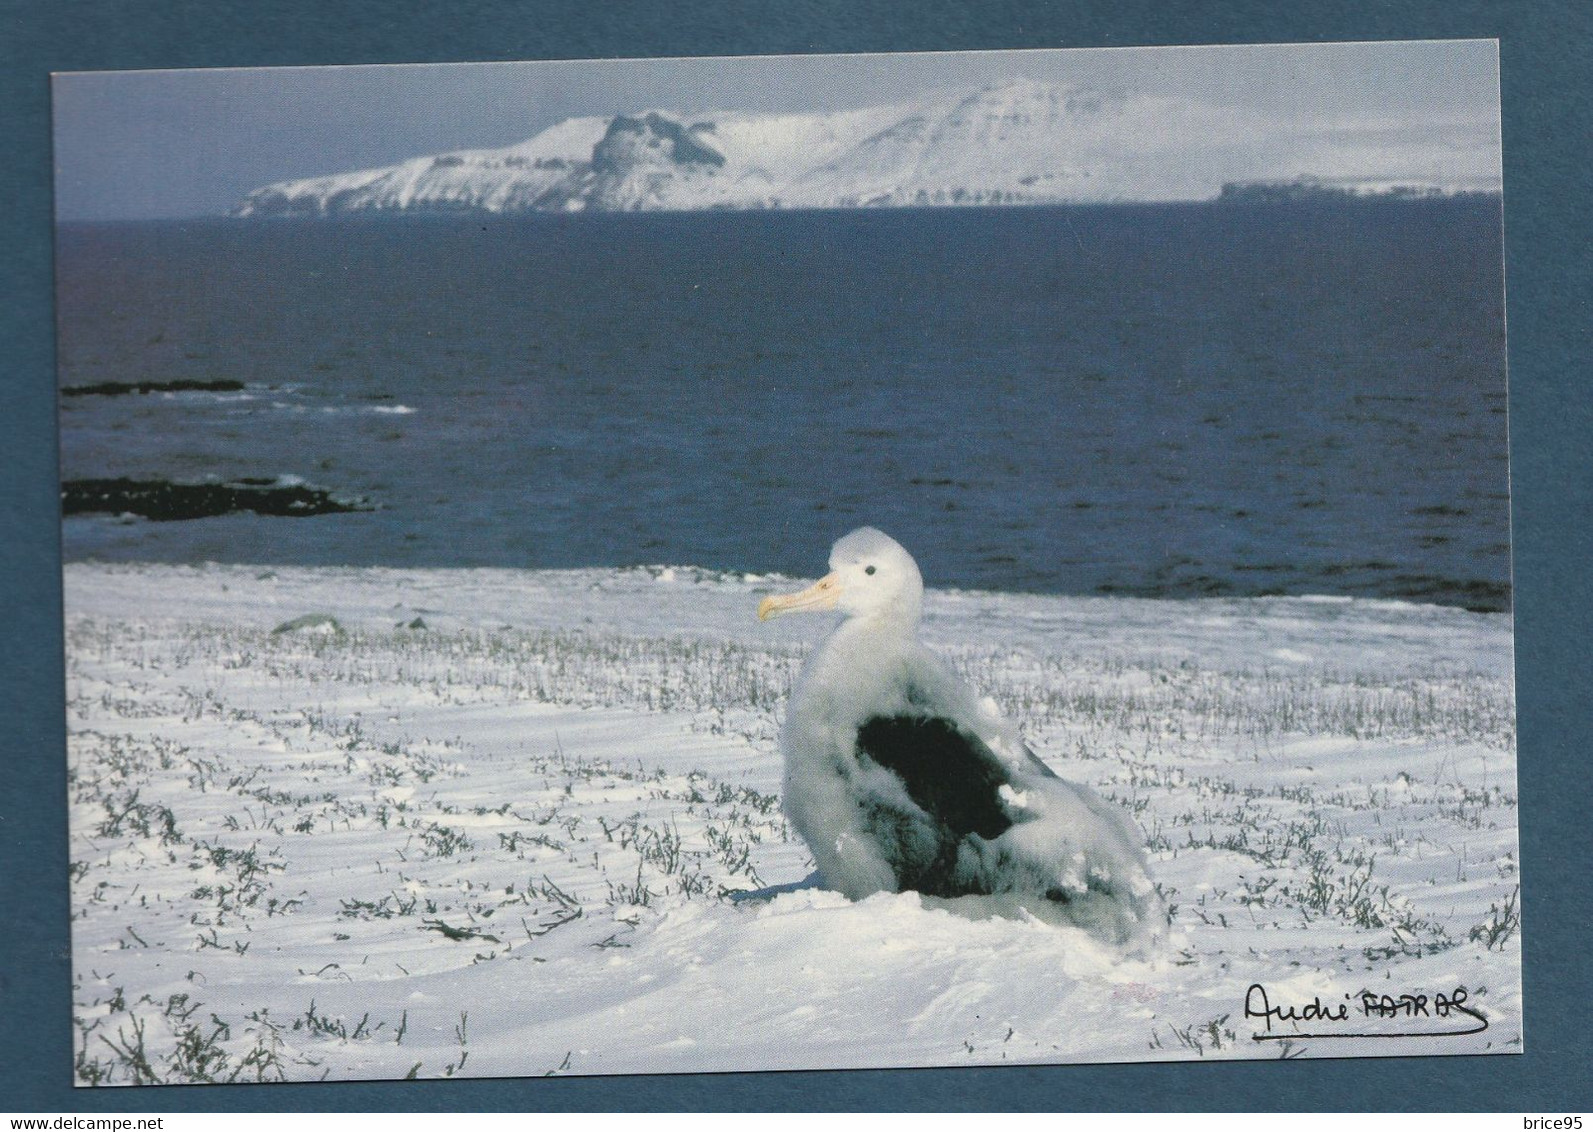 ⭐ TAAF - Carte Postale - Poussin De Grand Albatros - Kerguelen ⭐ - TAAF : French Southern And Antarctic Lands